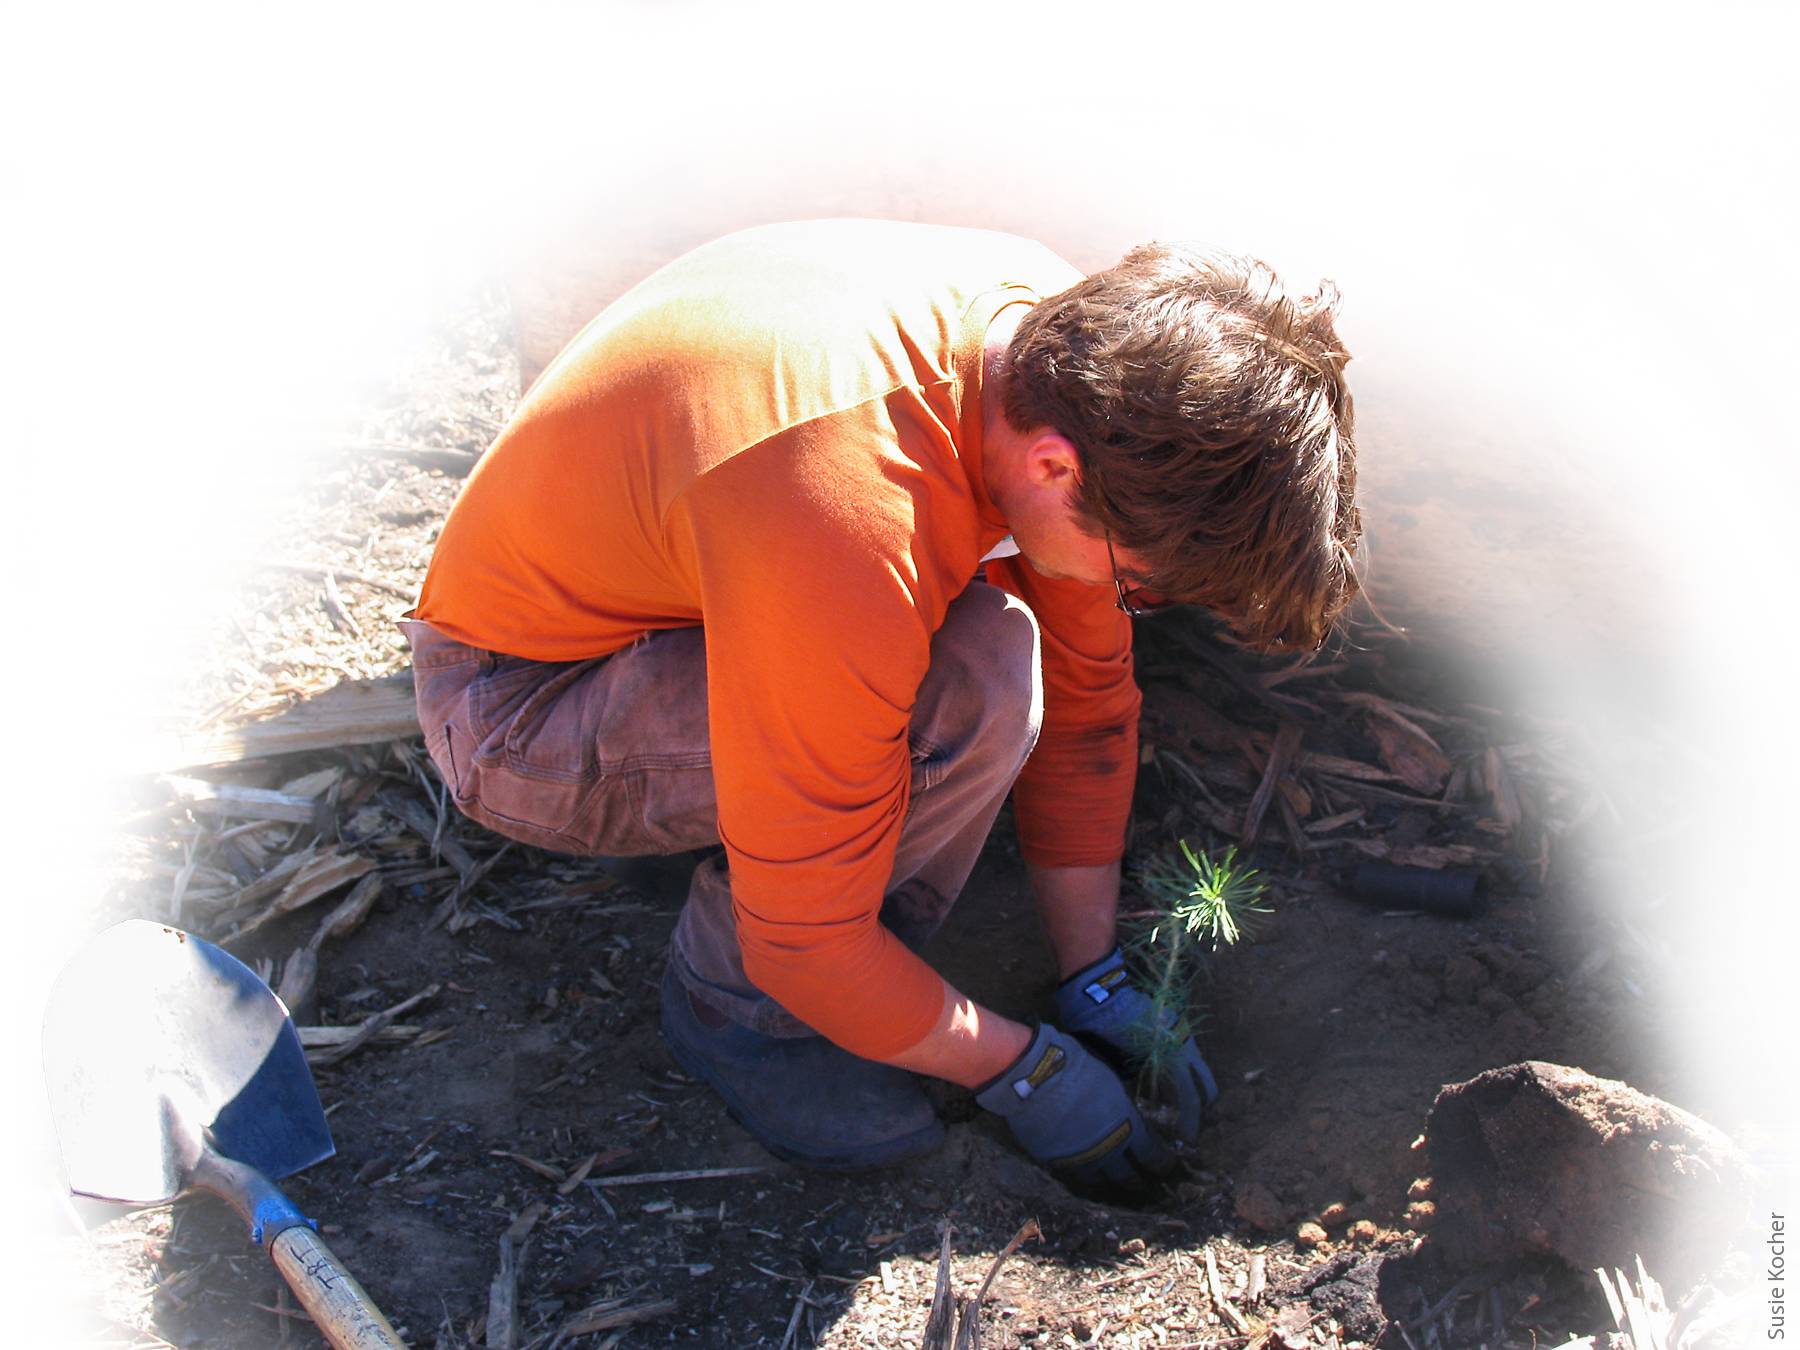 A volunteer for the League to Save Lake Tahoe plants a seedling after the Angora fire of 2007. A group of 350 volunteers worked to restore California Tahoe Conservancy land where all trees were killed by the fire.